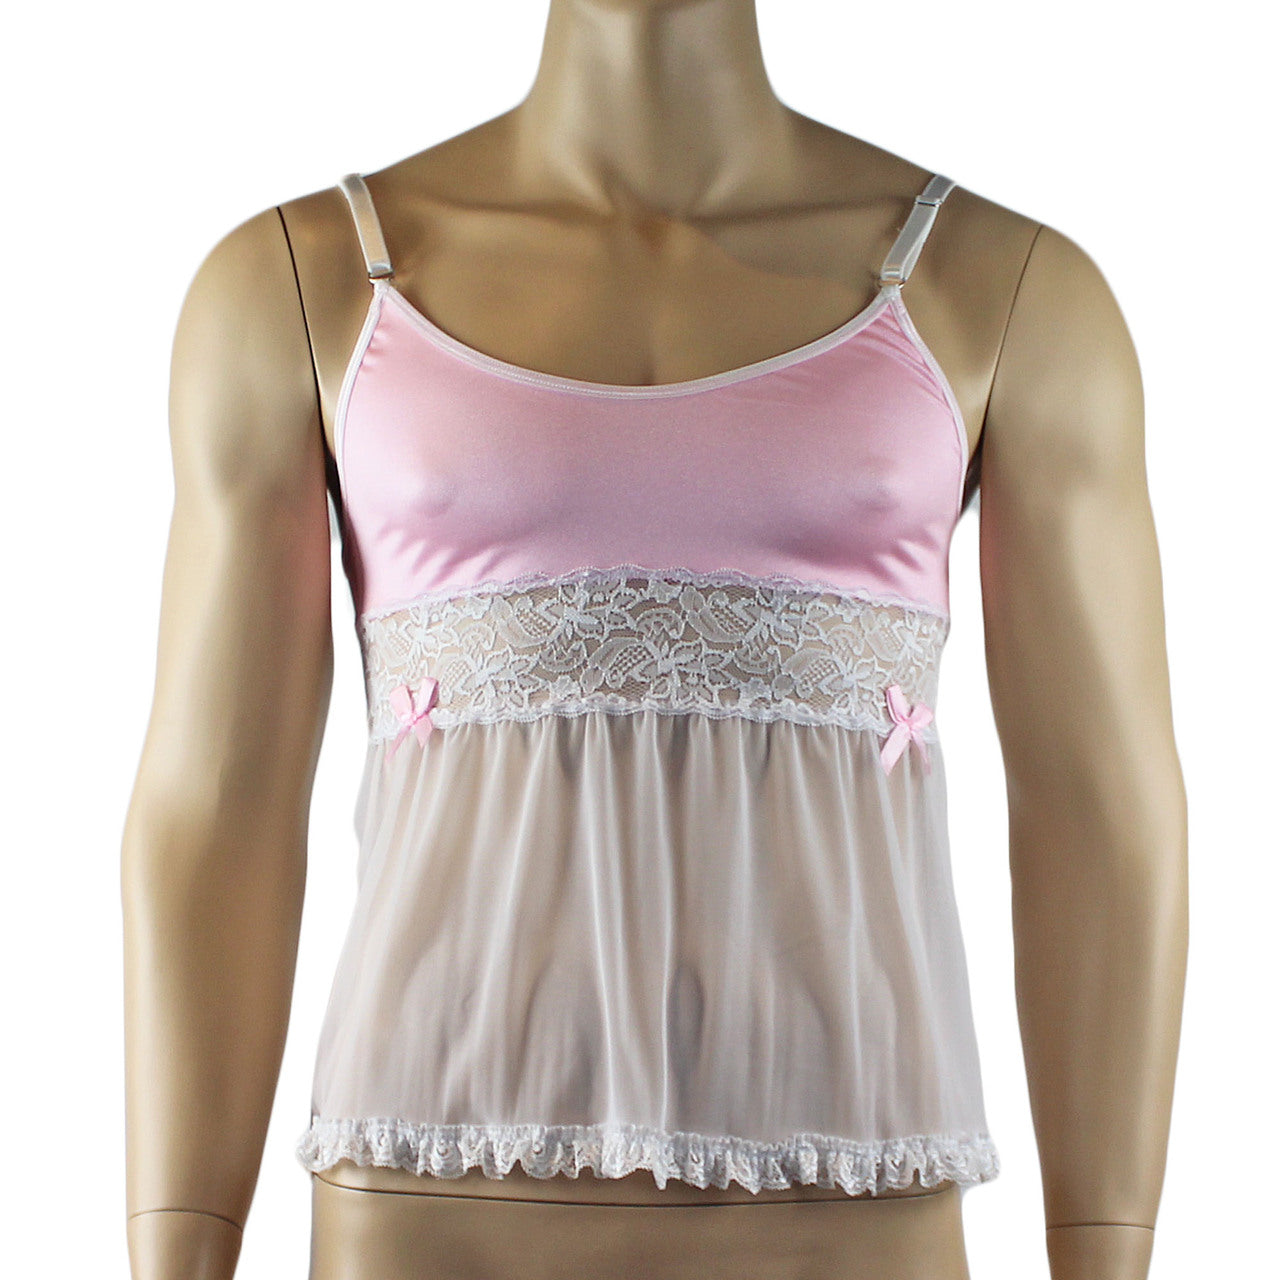 Mens Joanne Mini Babydoll Camisole - Sizes up to 3XL Light Pink & White